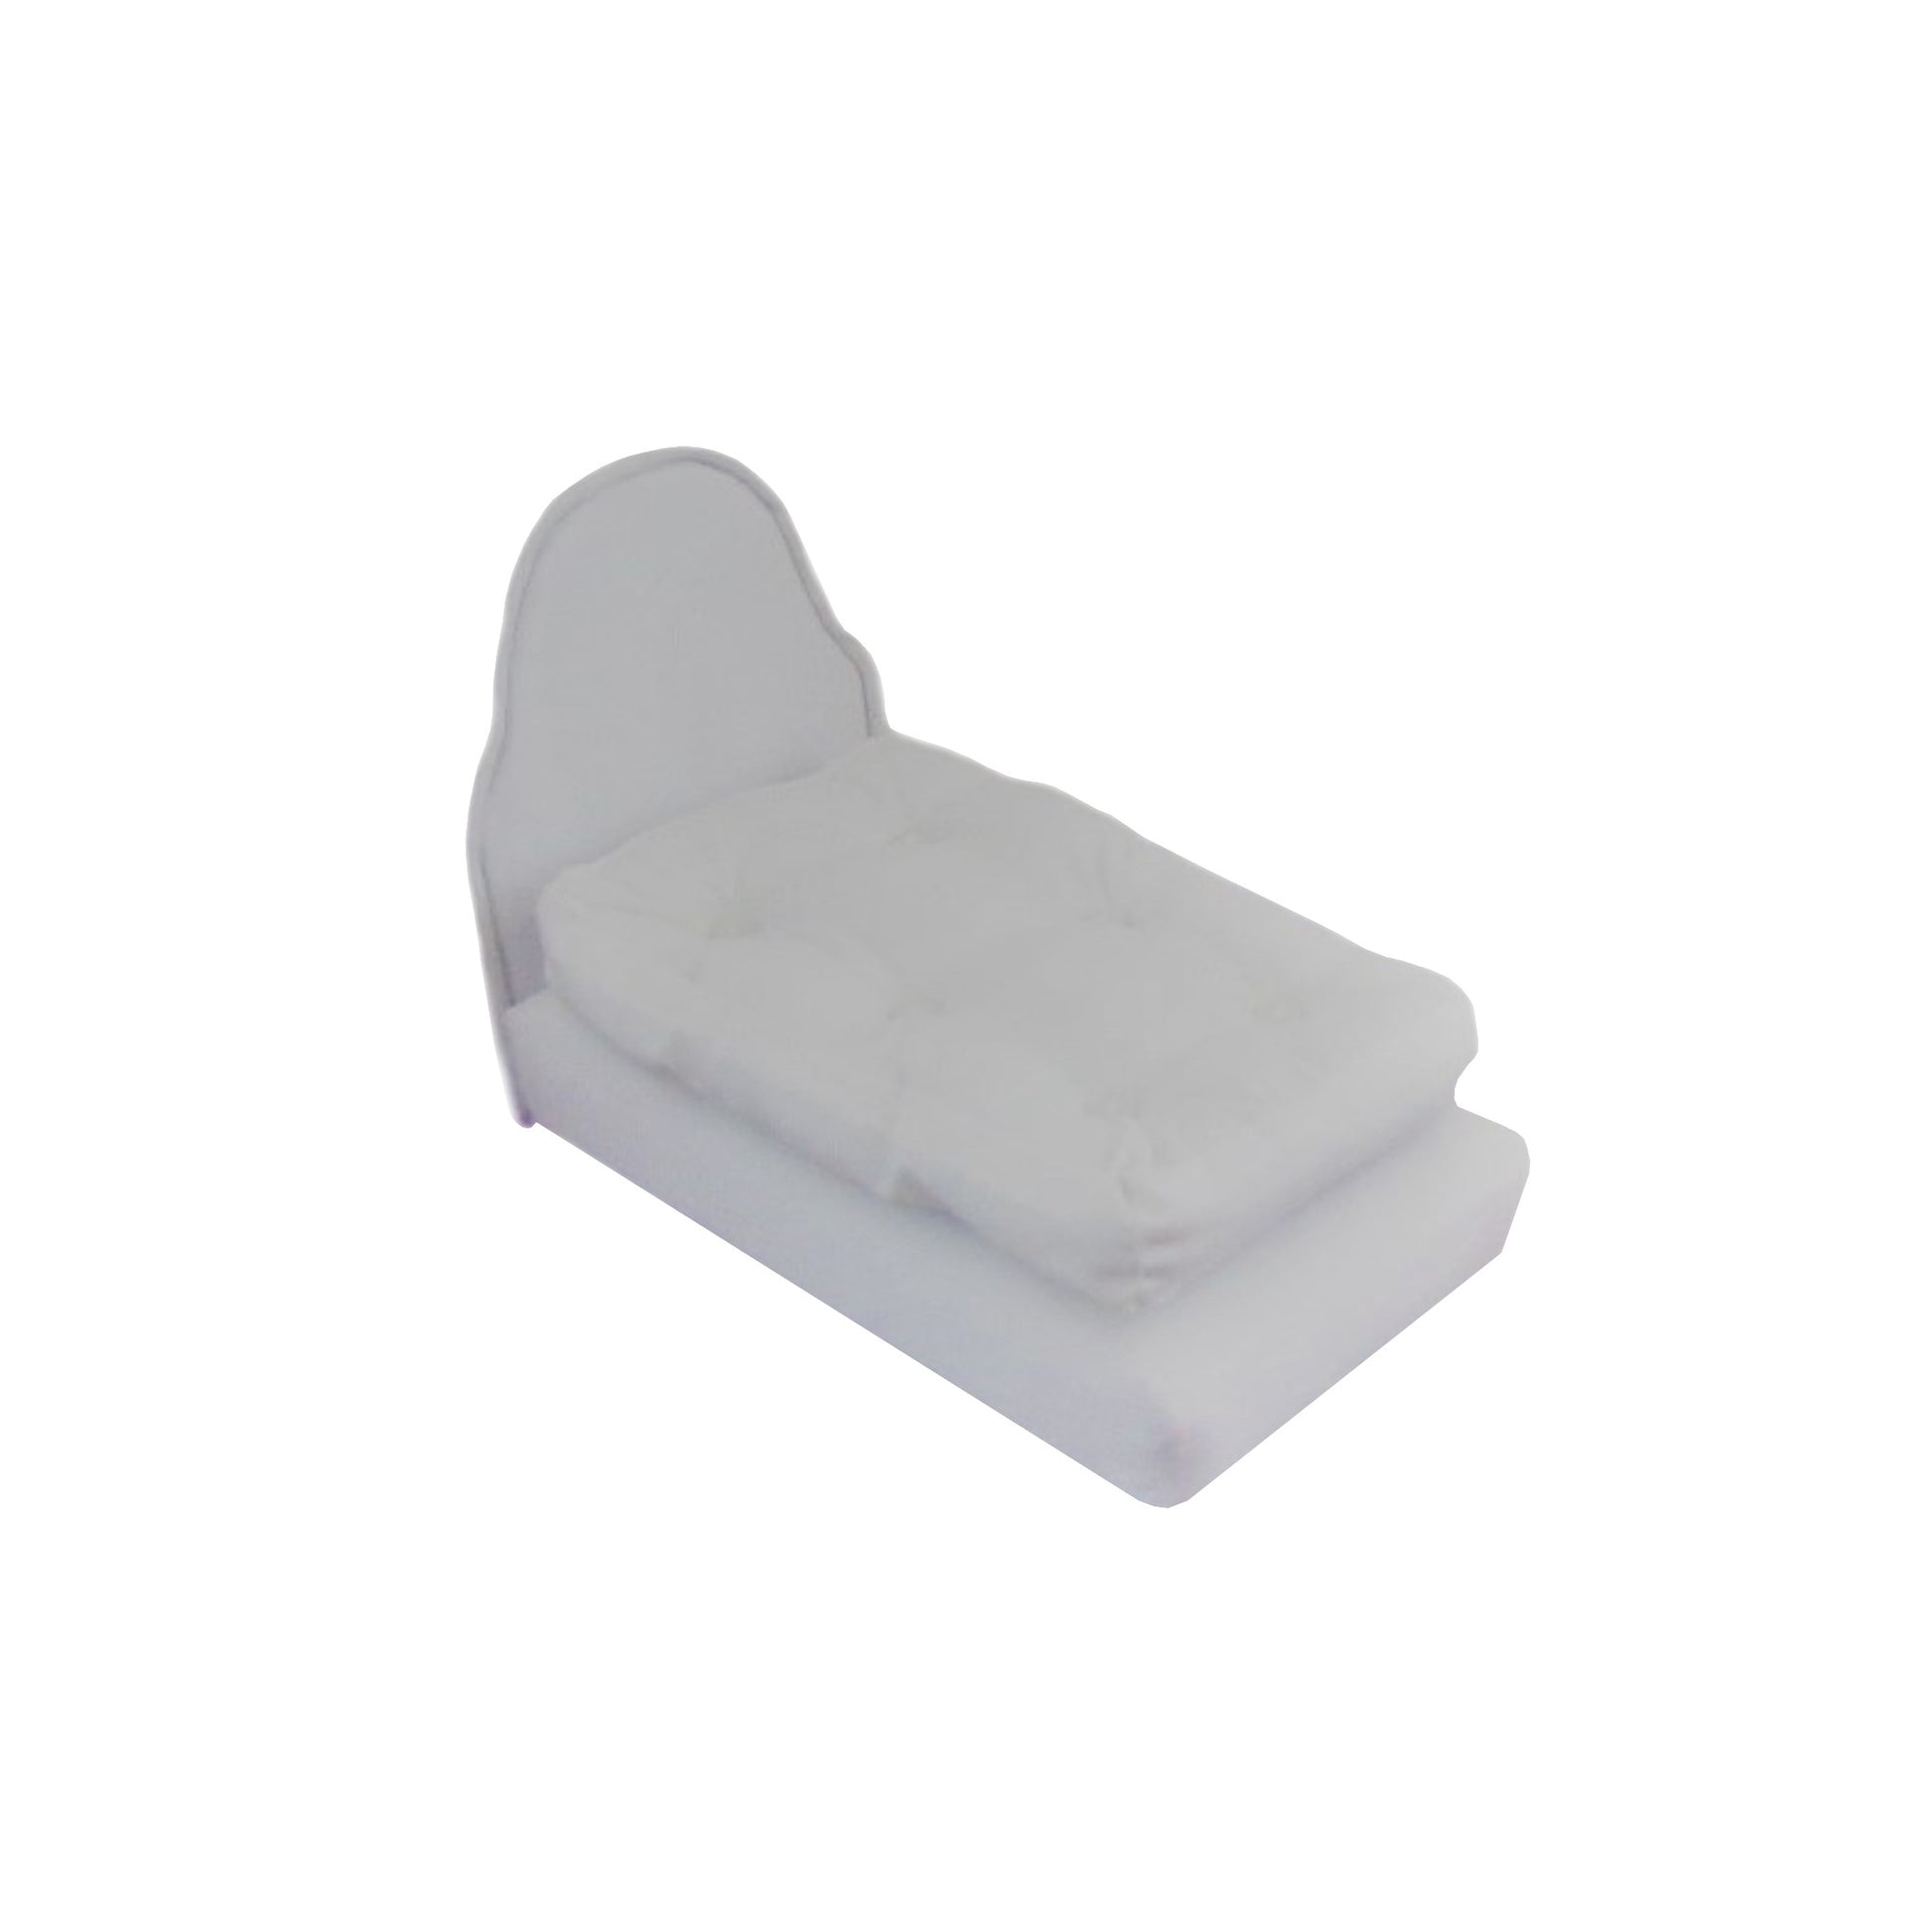 Upholstered White Doll Bed for 6.5-inch dolls